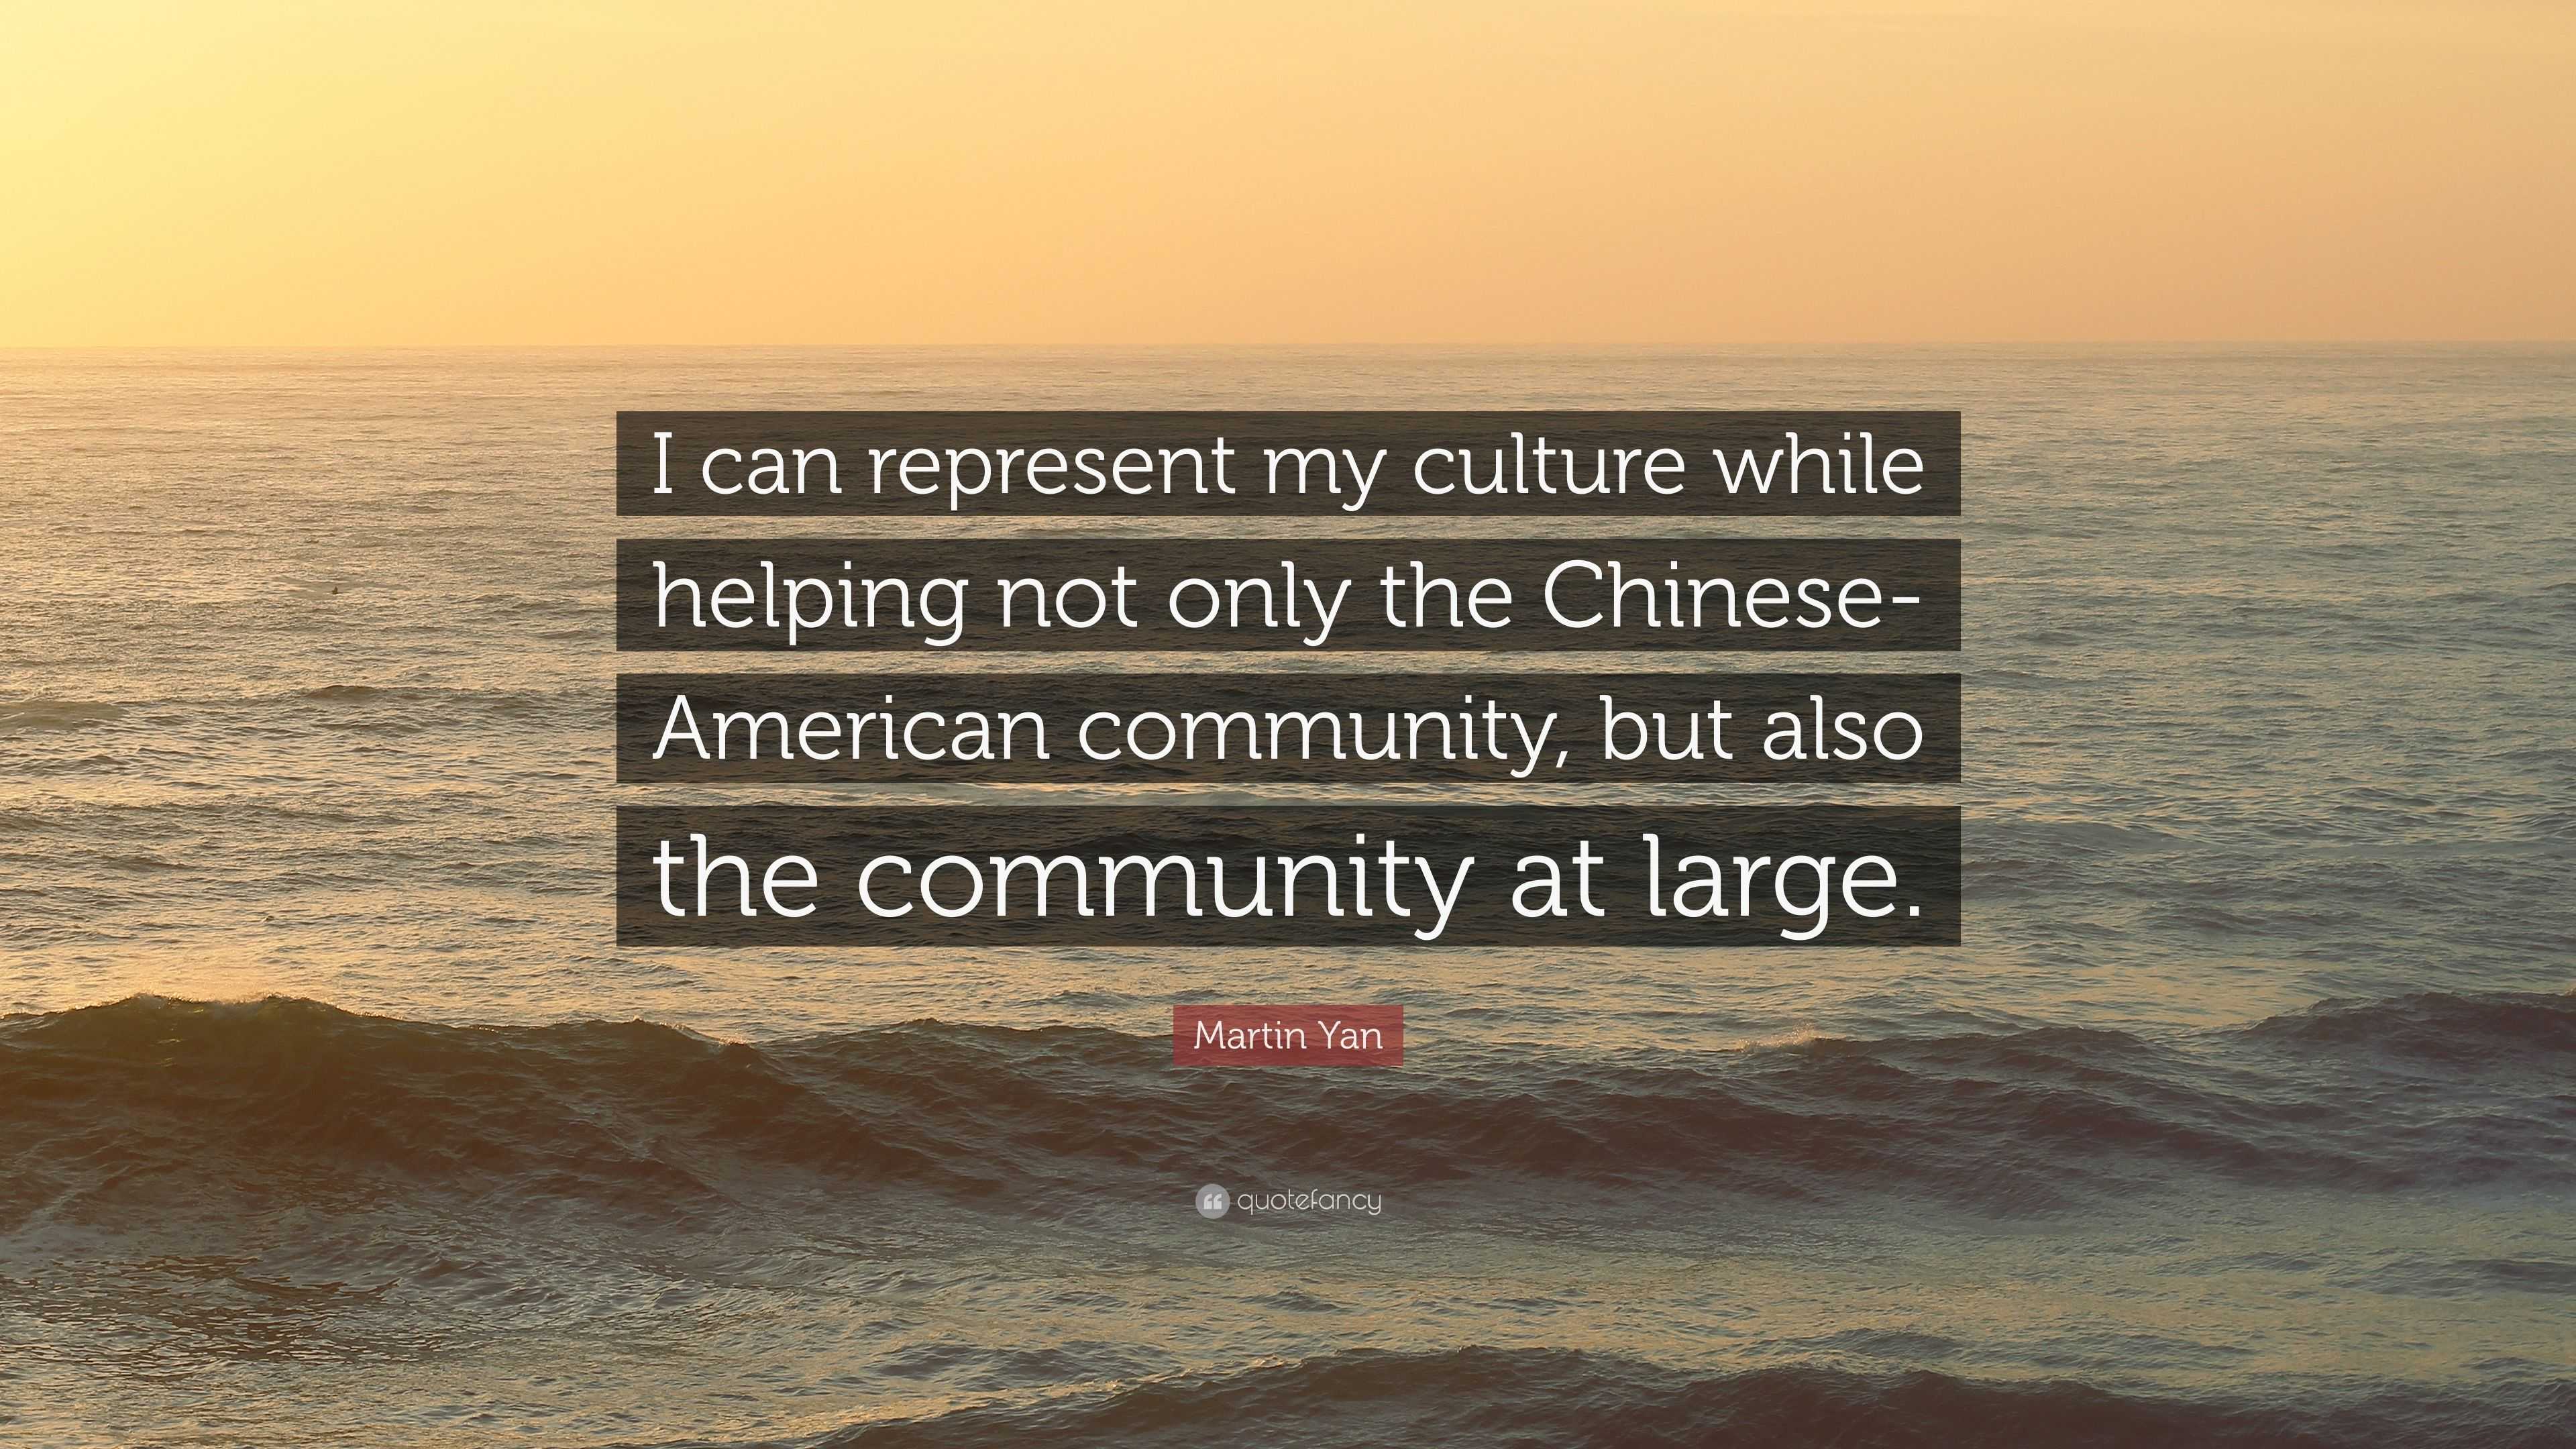 Martin Yan Quote: “I can represent my culture while helping not only ...